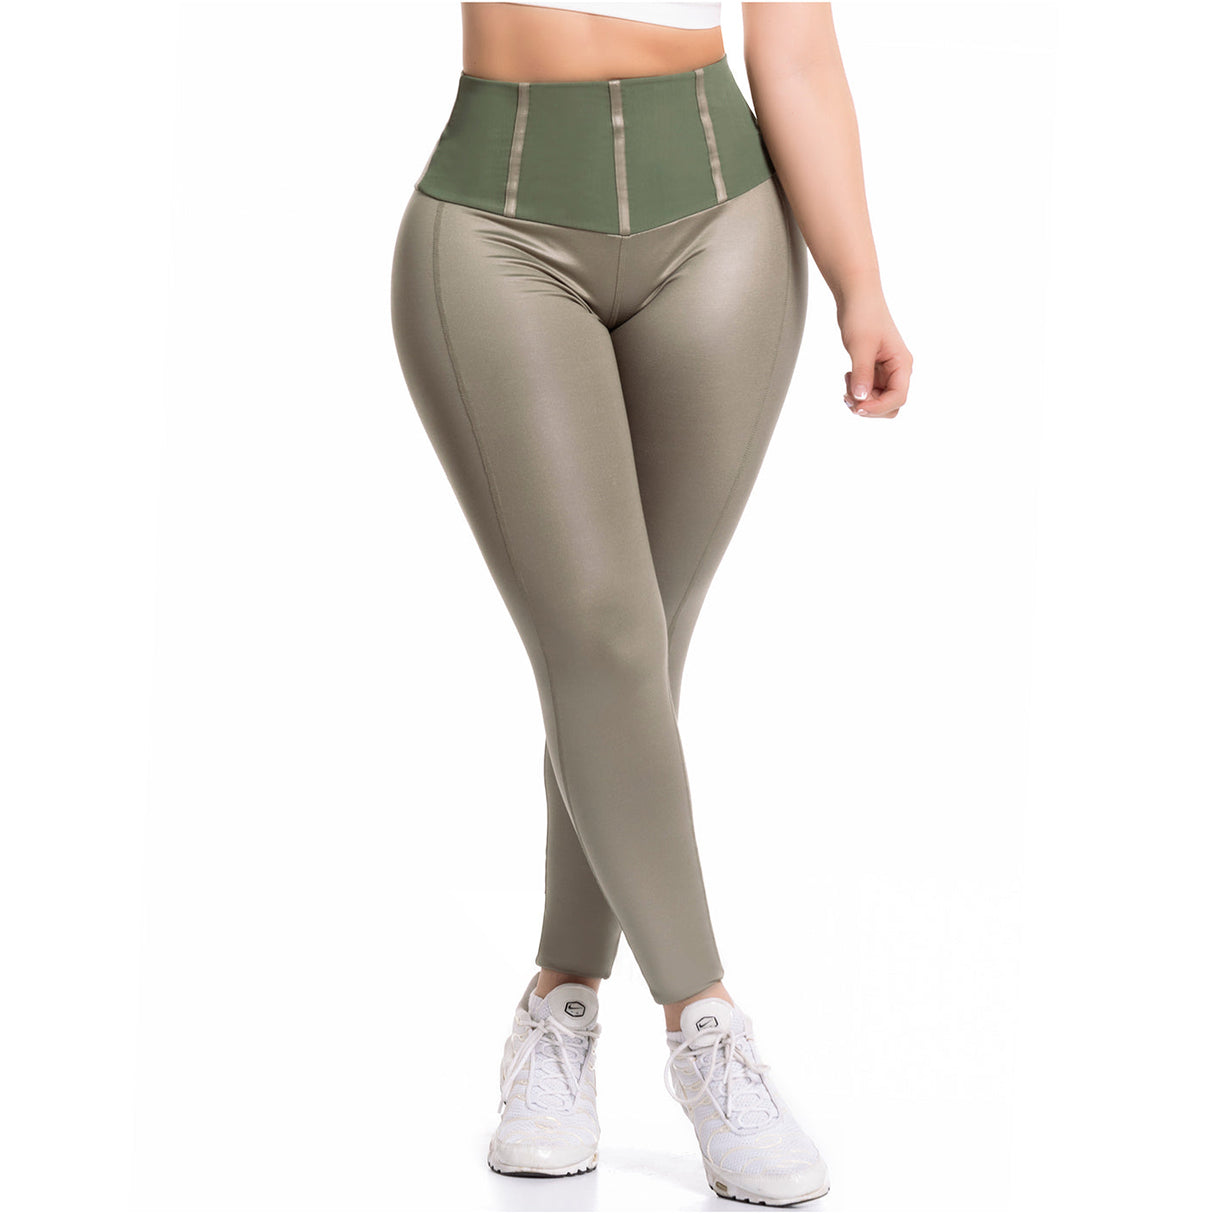 FLX Green Size Small Ladies Exercise Pants